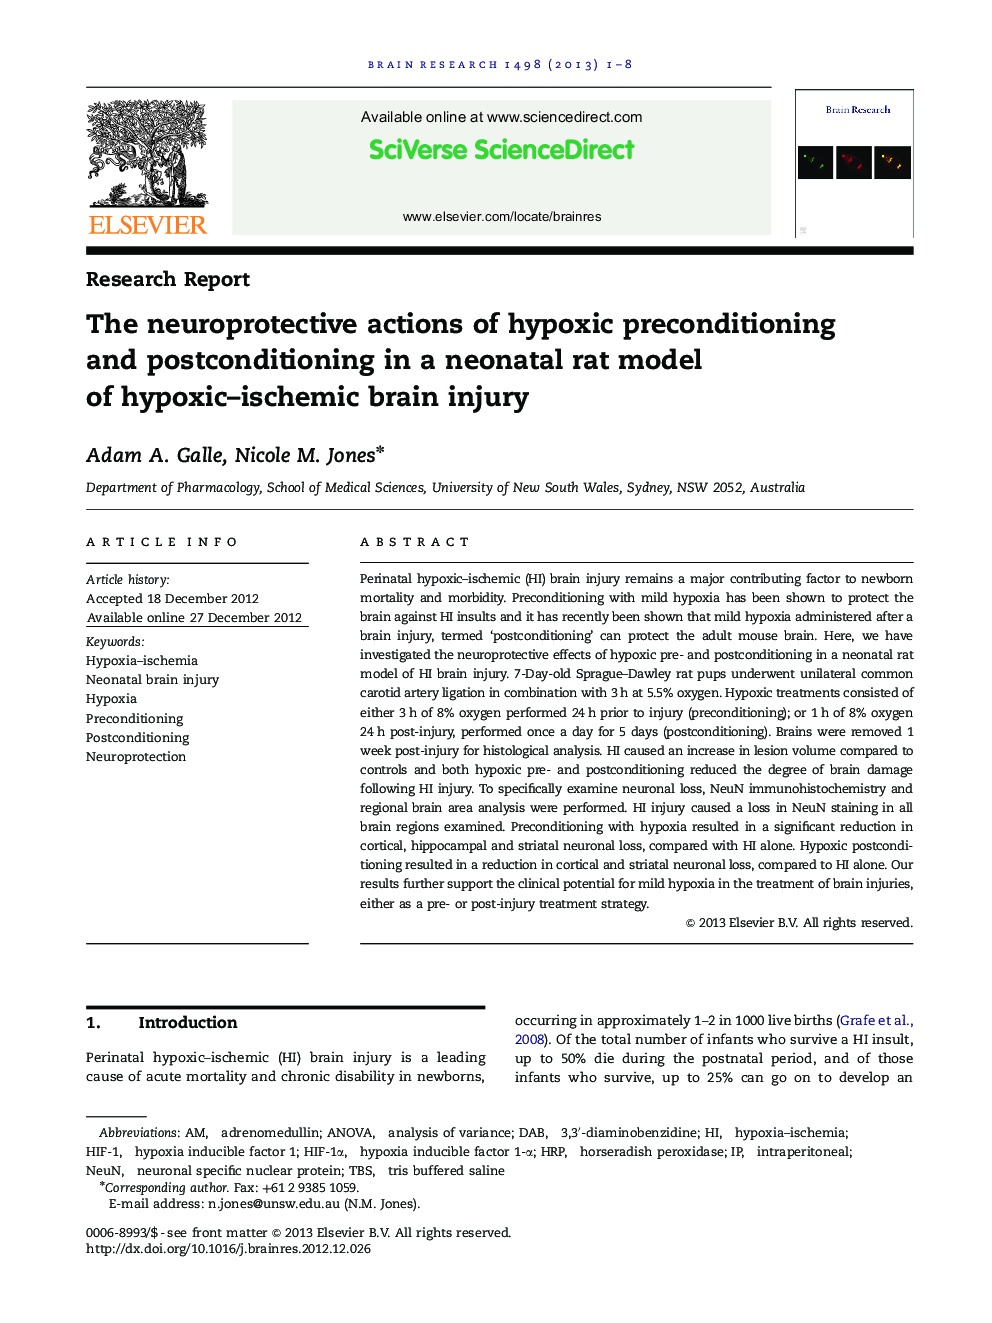 The neuroprotective actions of hypoxic preconditioning and postconditioning in a neonatal rat model of hypoxic–ischemic brain injury